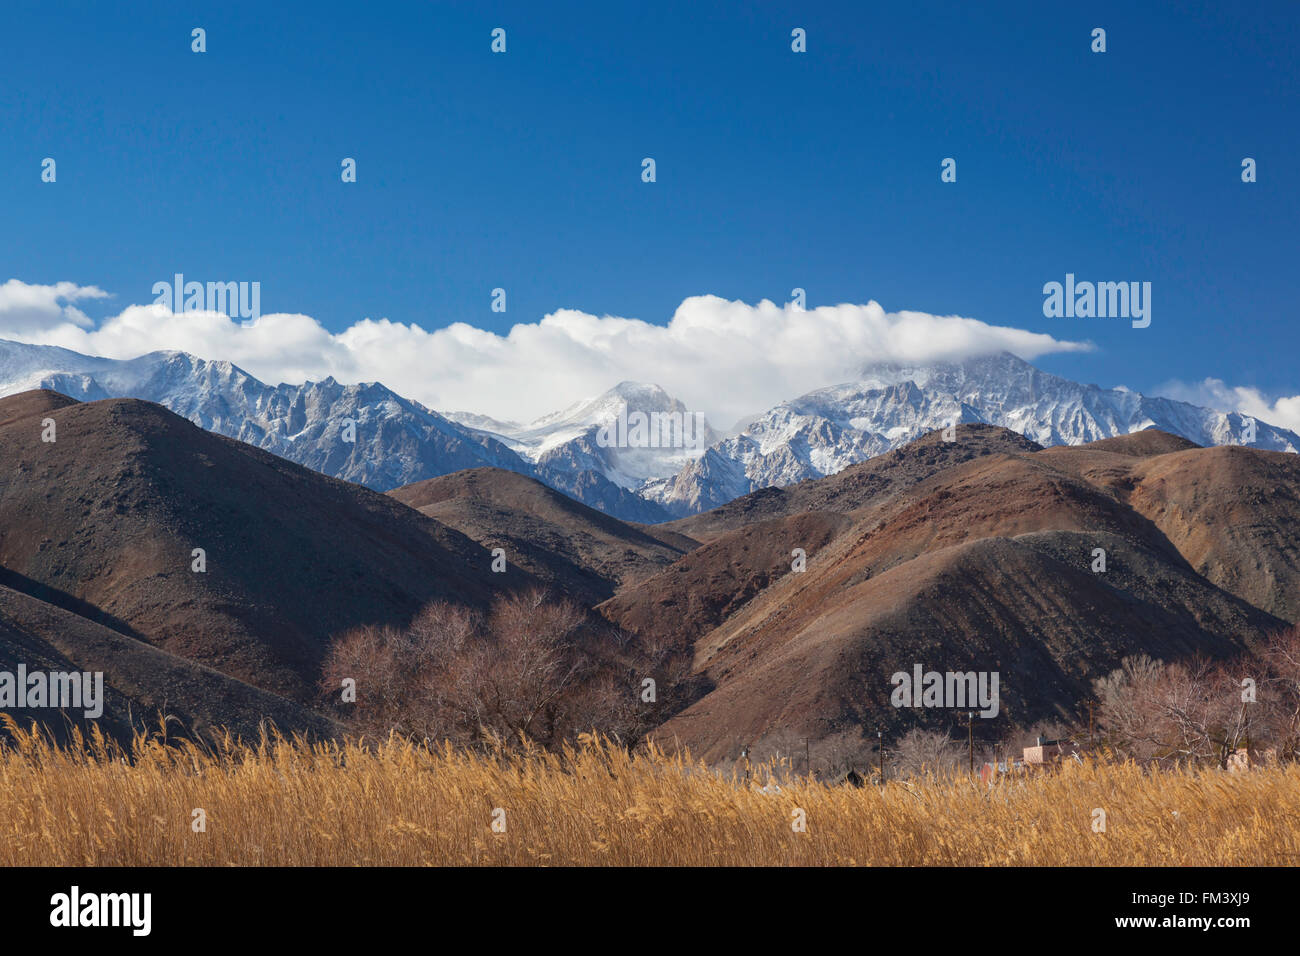 A view of hills and mountains on the east side of the Sierra Nevada Mountain Range, California Stock Photo